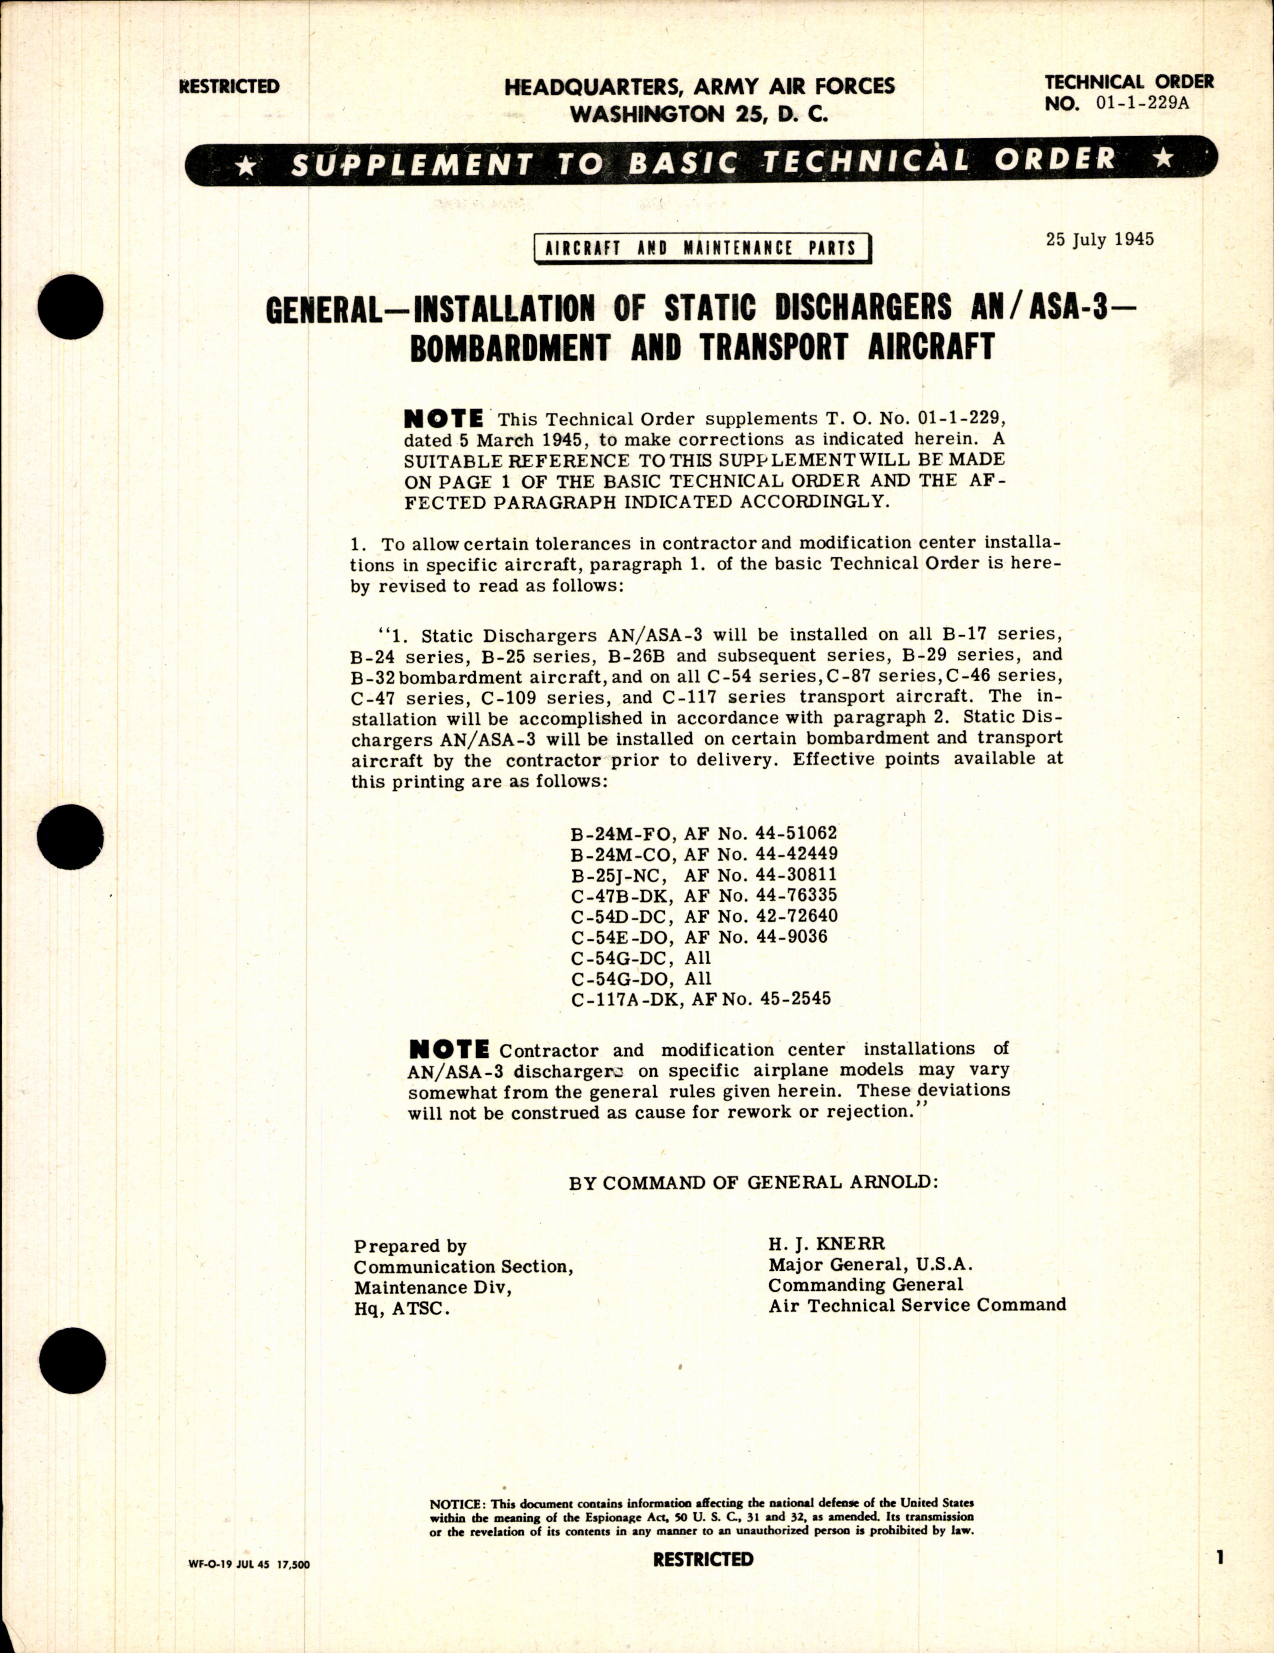 Sample page 1 from AirCorps Library document: Aircraft and Maintenance Parts; Installation of Static Dischargers AN/ASA-13 Bombardment and Transport Aircraft